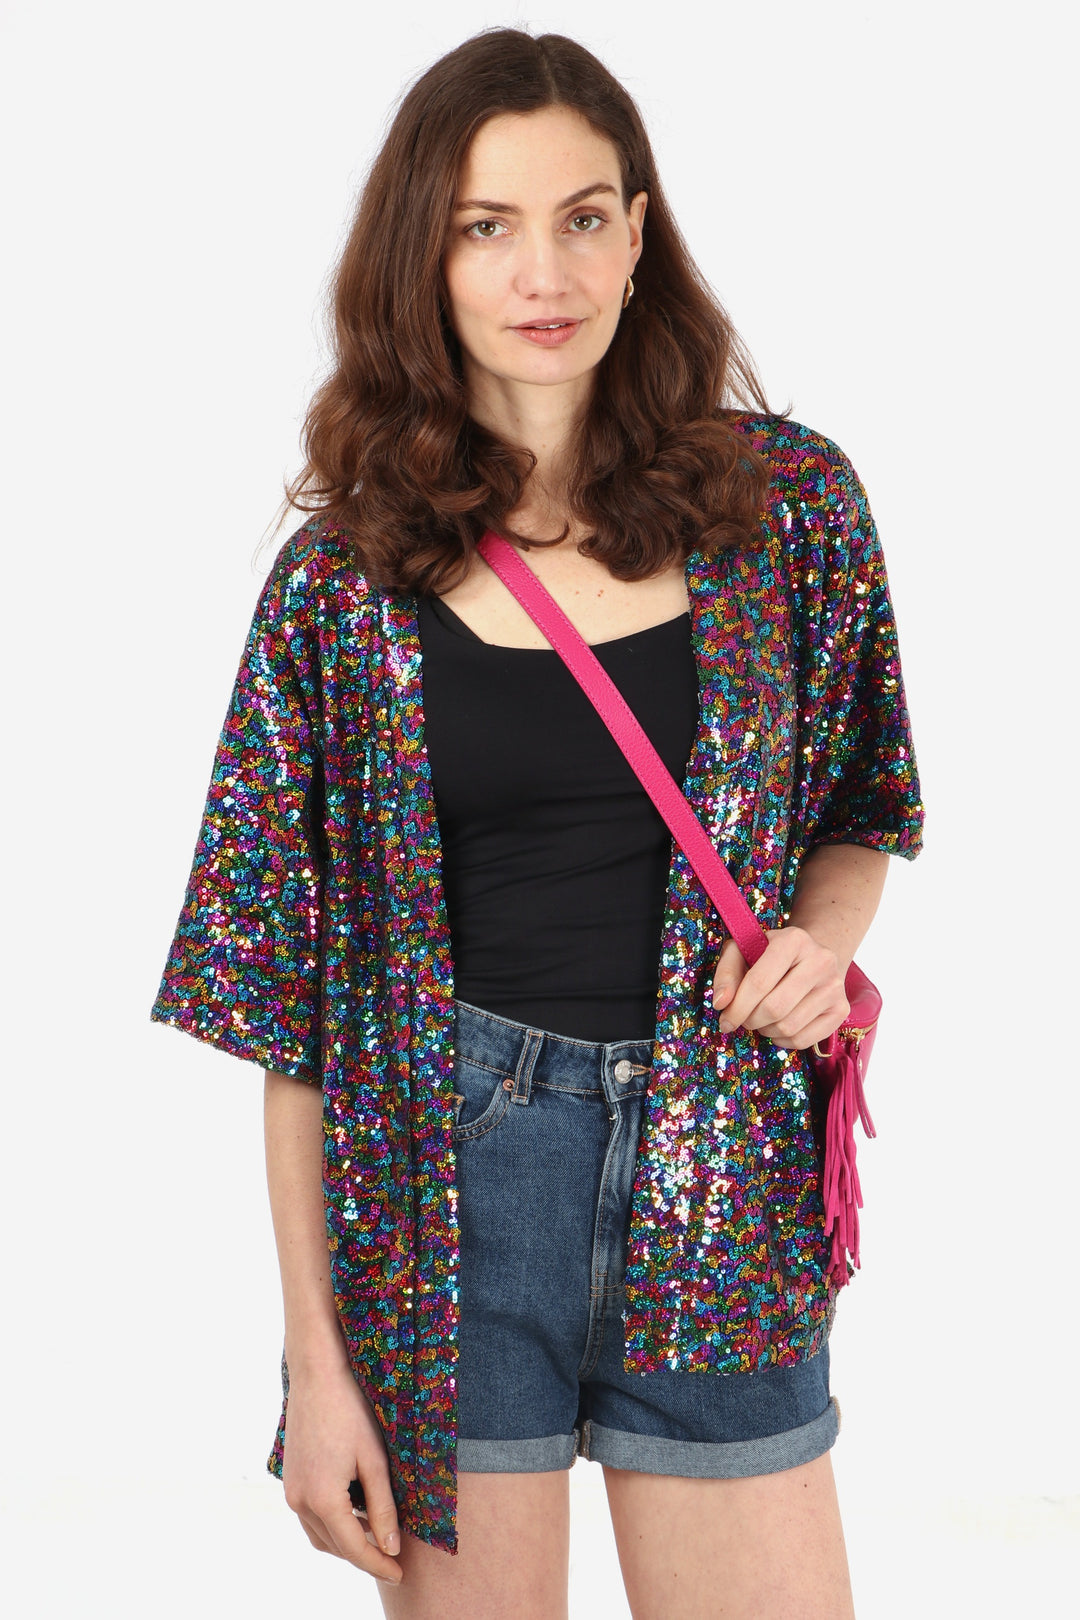 ladies rainbow sparkly evening jacket with kimono sleeves and an open front